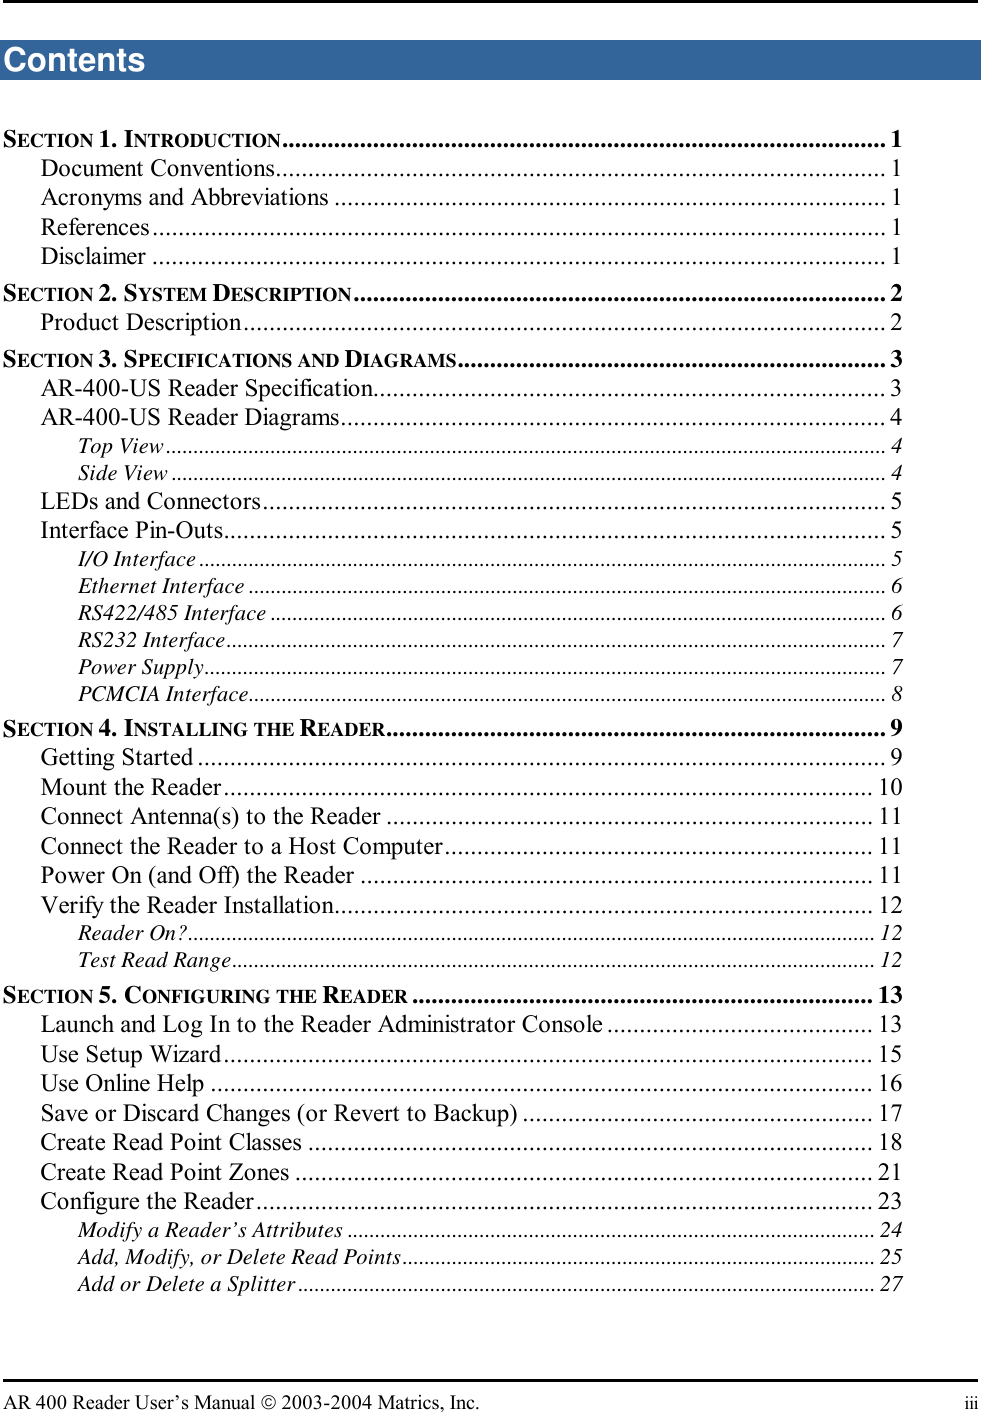   AR 400 Reader User’s Manual  2003-2004 Matrics, Inc.  iii Contents SECTION 1. INTRODUCTION............................................................................................. 1 Document Conventions.............................................................................................. 1 Acronyms and Abbreviations ..................................................................................... 1 References................................................................................................................. 1 Disclaimer ................................................................................................................. 1 SECTION 2. SYSTEM DESCRIPTION..................................................................................2 Product Description................................................................................................... 2 SECTION 3. SPECIFICATIONS AND DIAGRAMS..................................................................3 AR-400-US Reader Specification............................................................................... 3 AR-400-US Reader Diagrams.................................................................................... 4 Top View................................................................................................................................... 4 Side View .................................................................................................................................. 4 LEDs and Connectors................................................................................................ 5 Interface Pin-Outs...................................................................................................... 5 I/O Interface ............................................................................................................................. 5 Ethernet Interface .................................................................................................................... 6 RS422/485 Interface ................................................................................................................ 6 RS232 Interface........................................................................................................................ 7 Power Supply............................................................................................................................ 7 PCMCIA Interface.................................................................................................................... 8 SECTION 4. INSTALLING THE READER............................................................................. 9 Getting Started .......................................................................................................... 9 Mount the Reader.................................................................................................... 10 Connect Antenna(s) to the Reader ........................................................................... 11 Connect the Reader to a Host Computer.................................................................. 11 Power On (and Off) the Reader ............................................................................... 11 Verify the Reader Installation................................................................................... 12 Reader On?............................................................................................................................. 12 Test Read Range..................................................................................................................... 12 SECTION 5. CONFIGURING THE READER ....................................................................... 13 Launch and Log In to the Reader Administrator Console ......................................... 13 Use Setup Wizard.................................................................................................... 15 Use Online Help ...................................................................................................... 16 Save or Discard Changes (or Revert to Backup) ...................................................... 17 Create Read Point Classes ....................................................................................... 18 Create Read Point Zones ......................................................................................... 21 Configure the Reader............................................................................................... 23 Modify a Reader’s Attributes ................................................................................................ 24 Add, Modify, or Delete Read Points...................................................................................... 25 Add or Delete a Splitter......................................................................................................... 27 